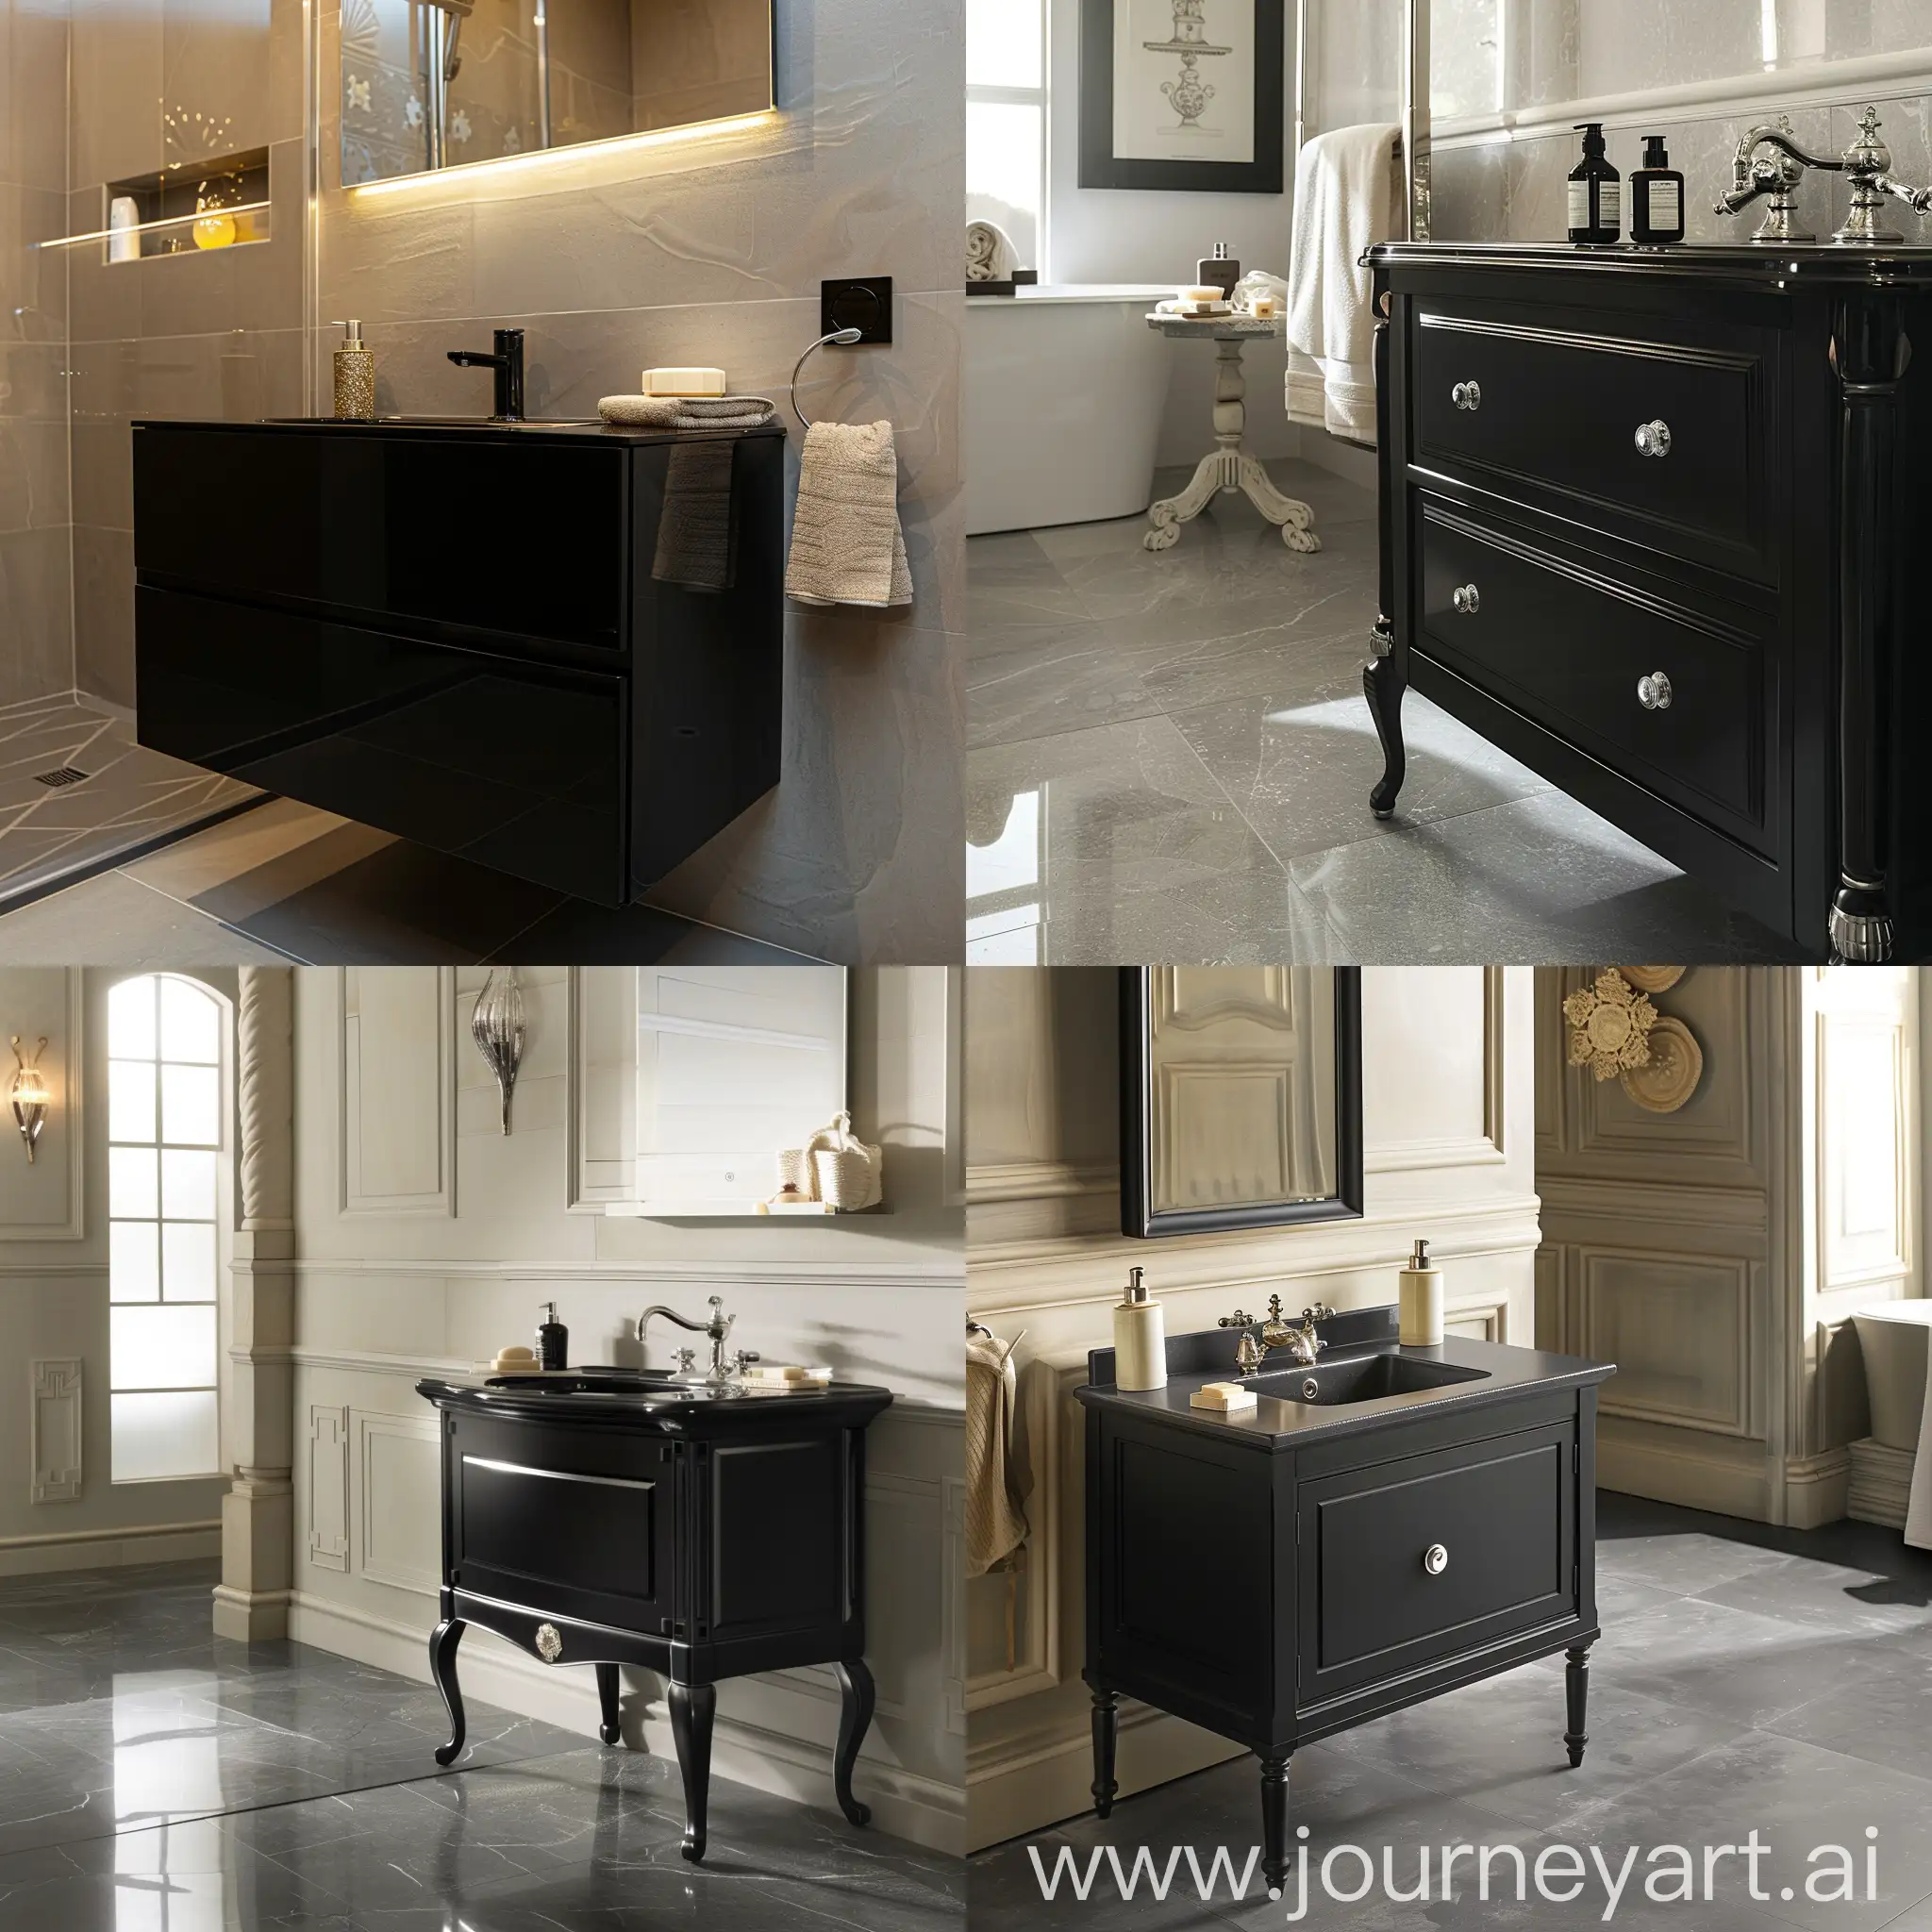 Modern-Bathroom-with-Black-Sink-Cabinet-and-Cream-Decorations-in-Warm-Morning-Light